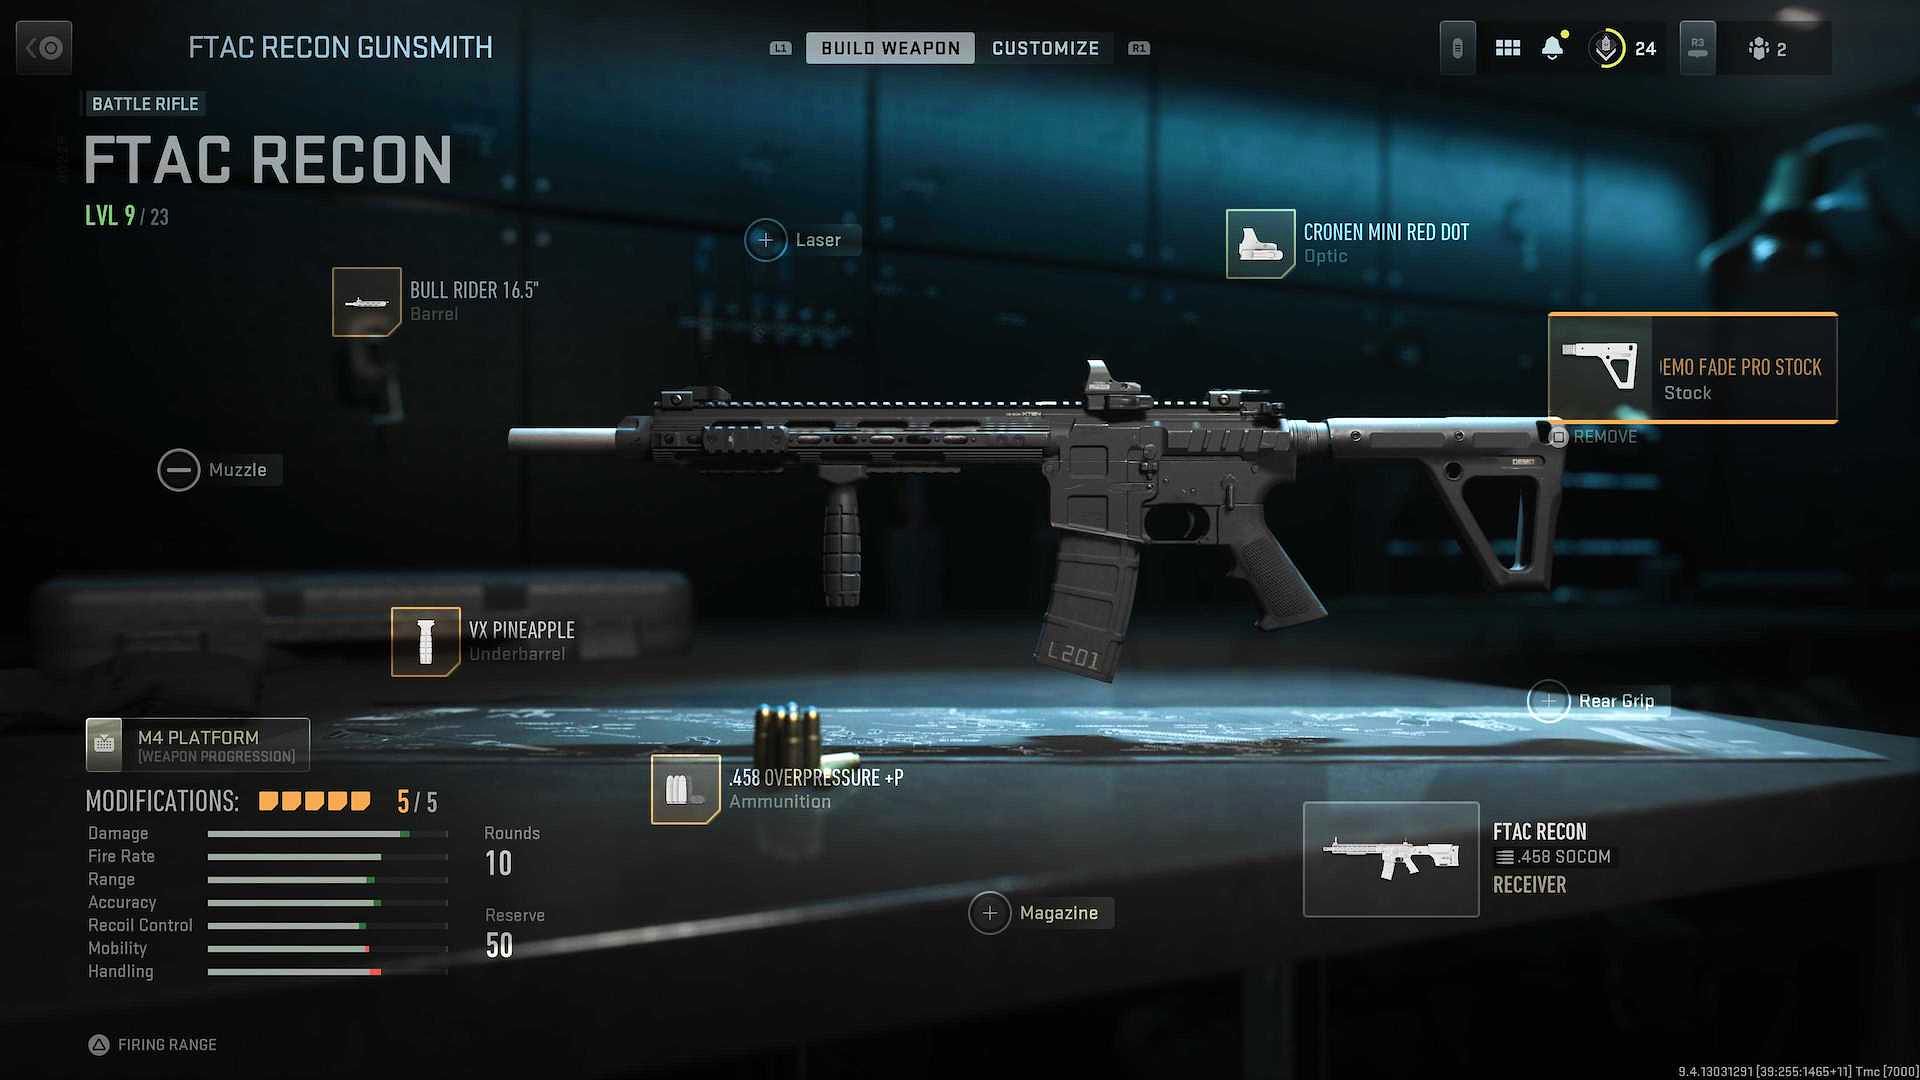 Image of the Gunsmith menu for the FTAC Recon Marksman Rifle in Call of Duty Modern Warfare 2.